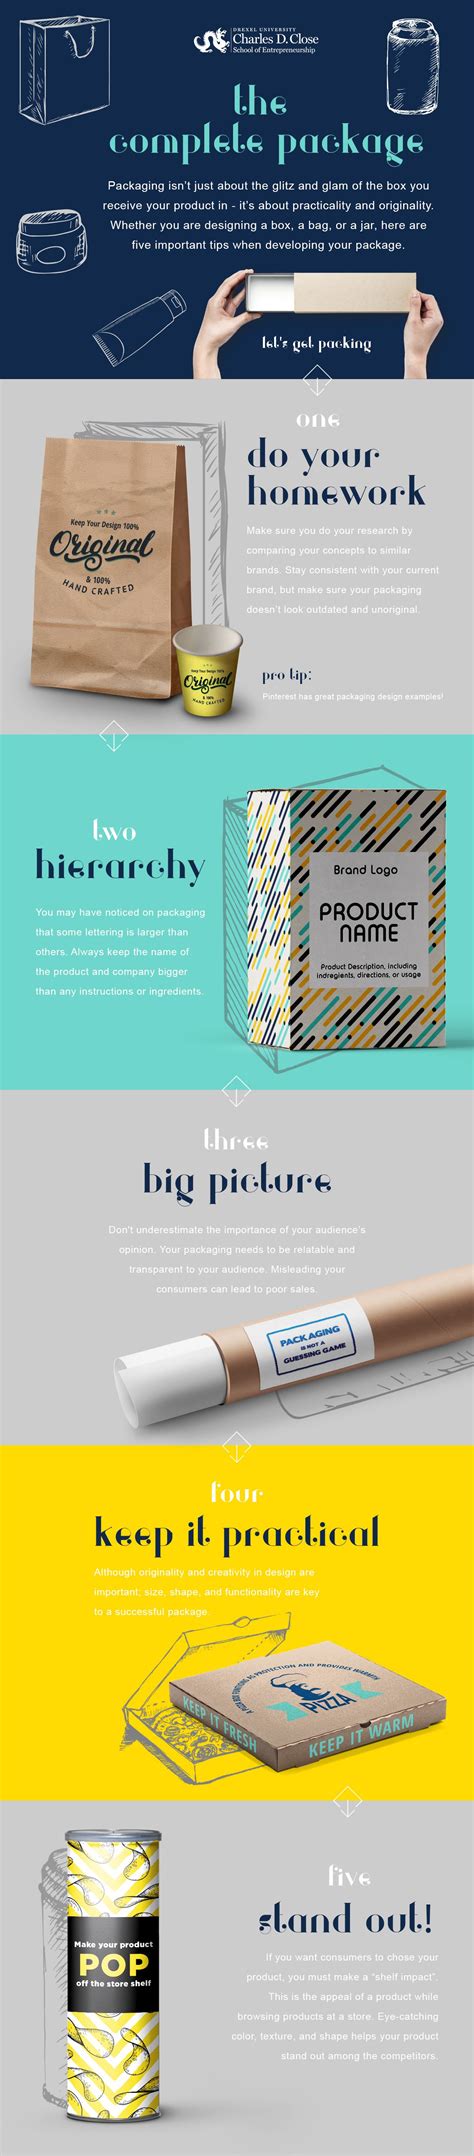 complete package infographic completed branding packaging school infographics brand